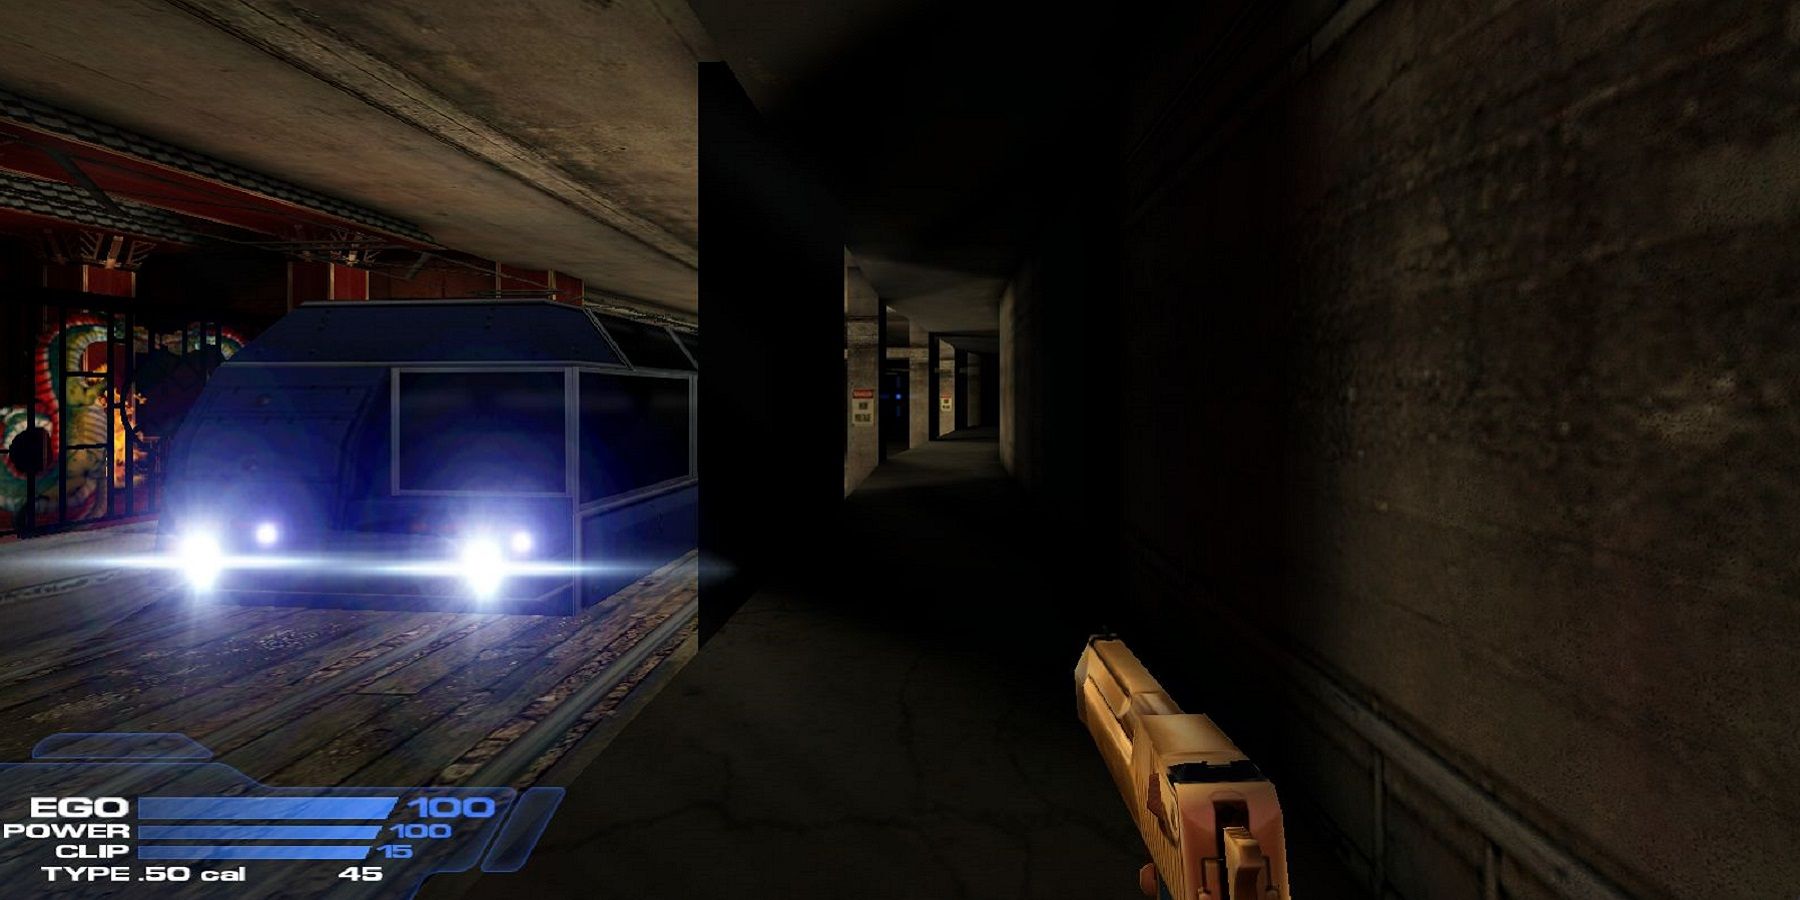 Image from 2001 build of Duke Nukem Forever showing the player in an underground rail system.